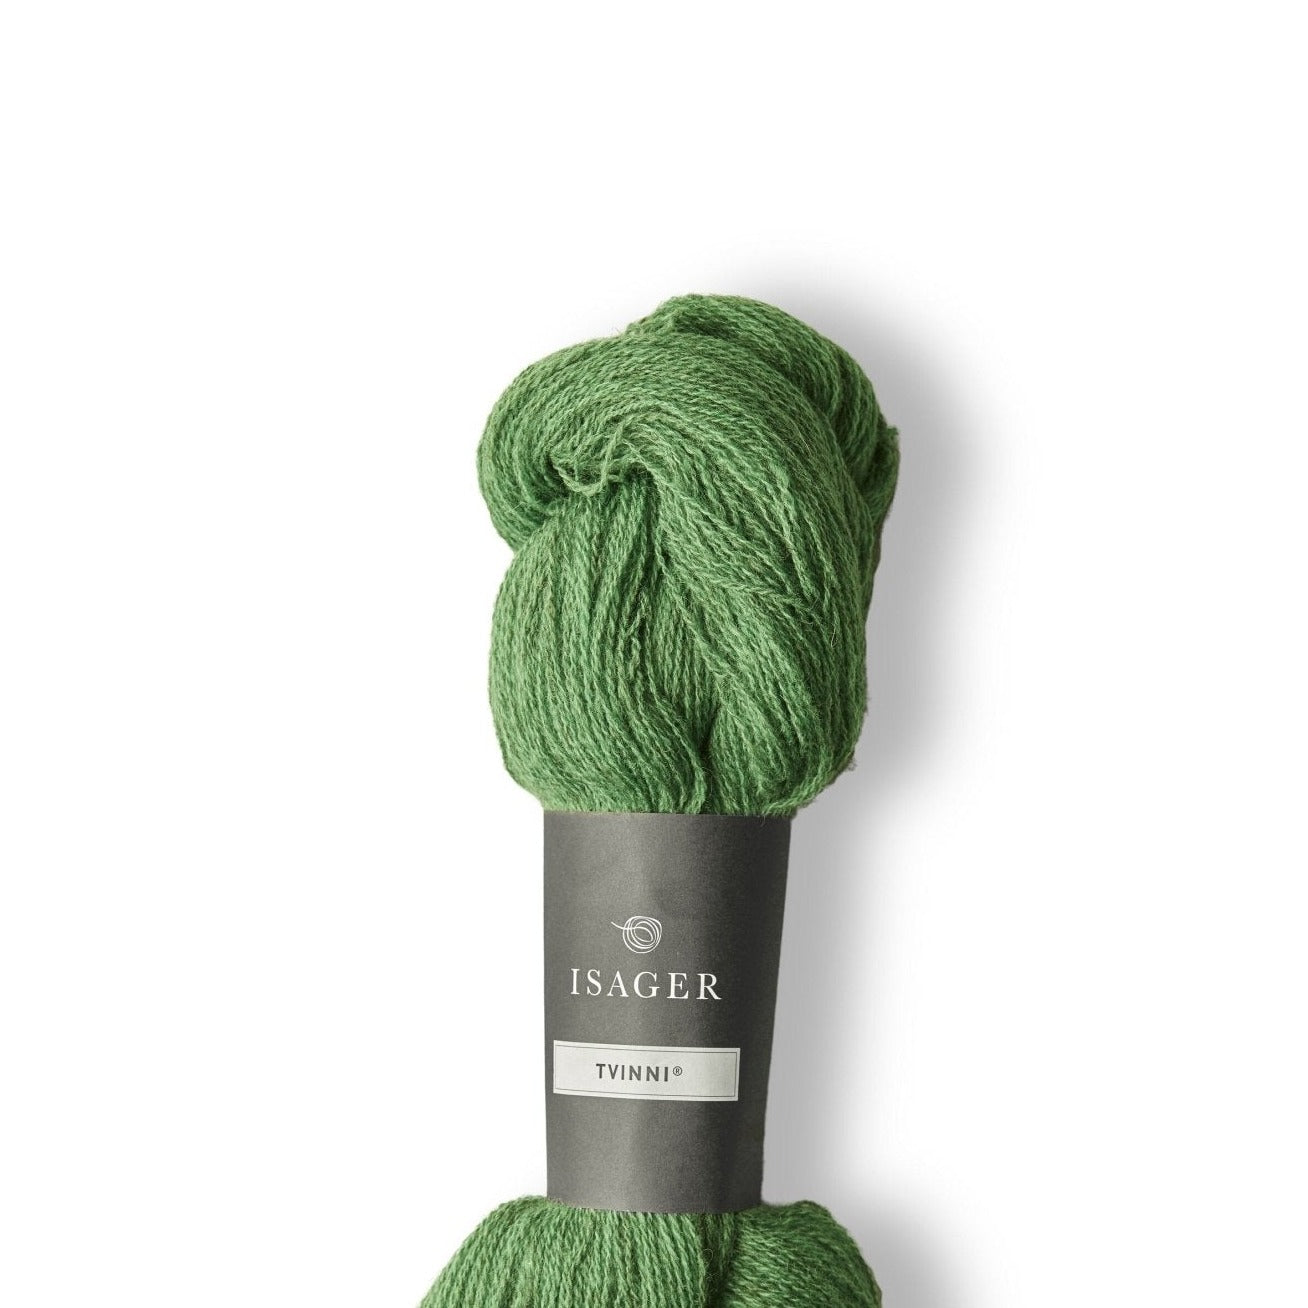 Isager Tvinni - 56s - 4 Ply - Isager - The Little Yarn Store